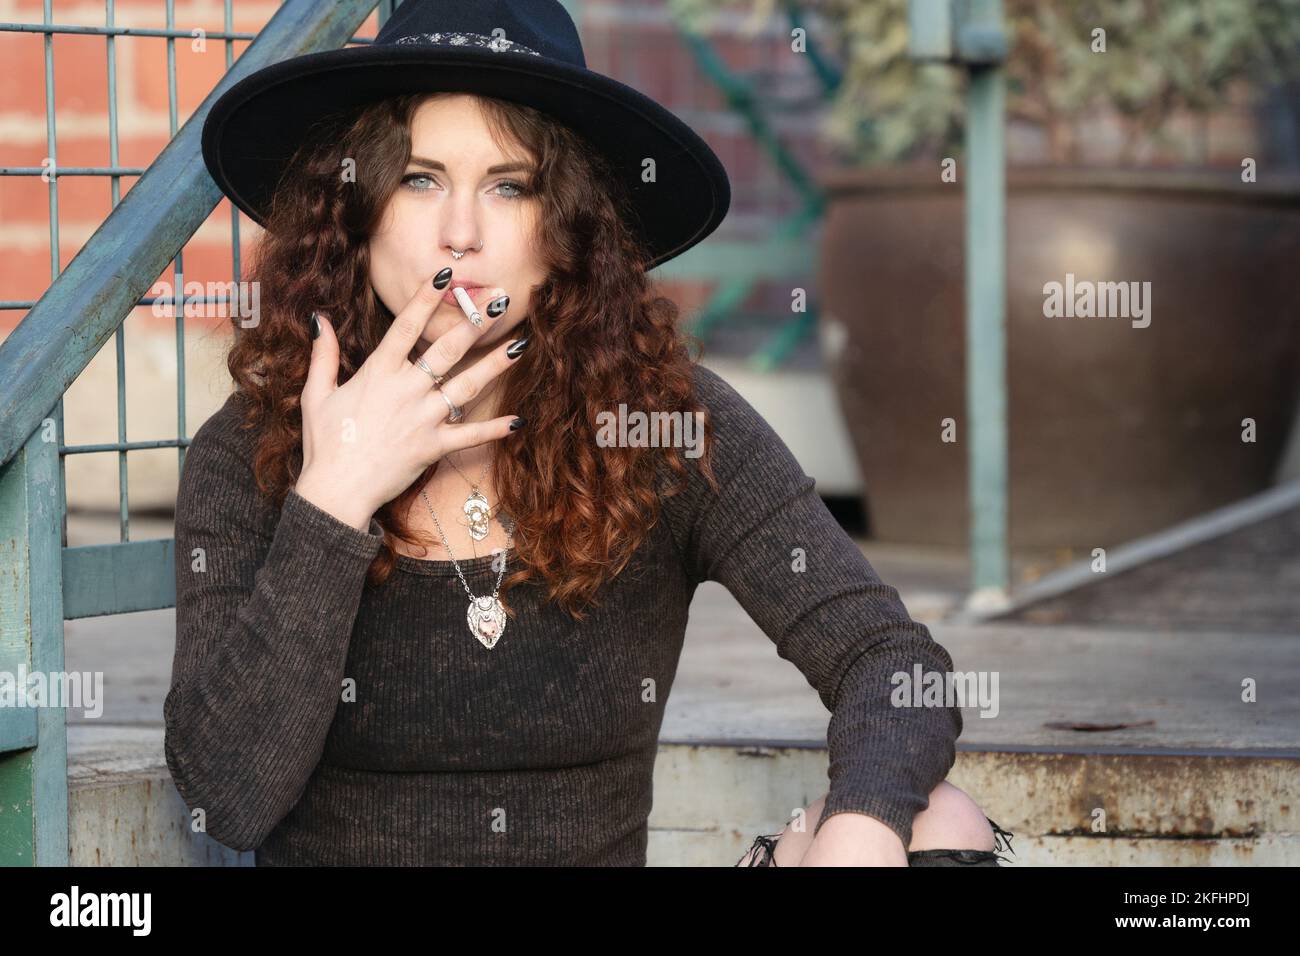 a half-body natural portrait of a woman in a black hat smoking a cigarette Stock Photo